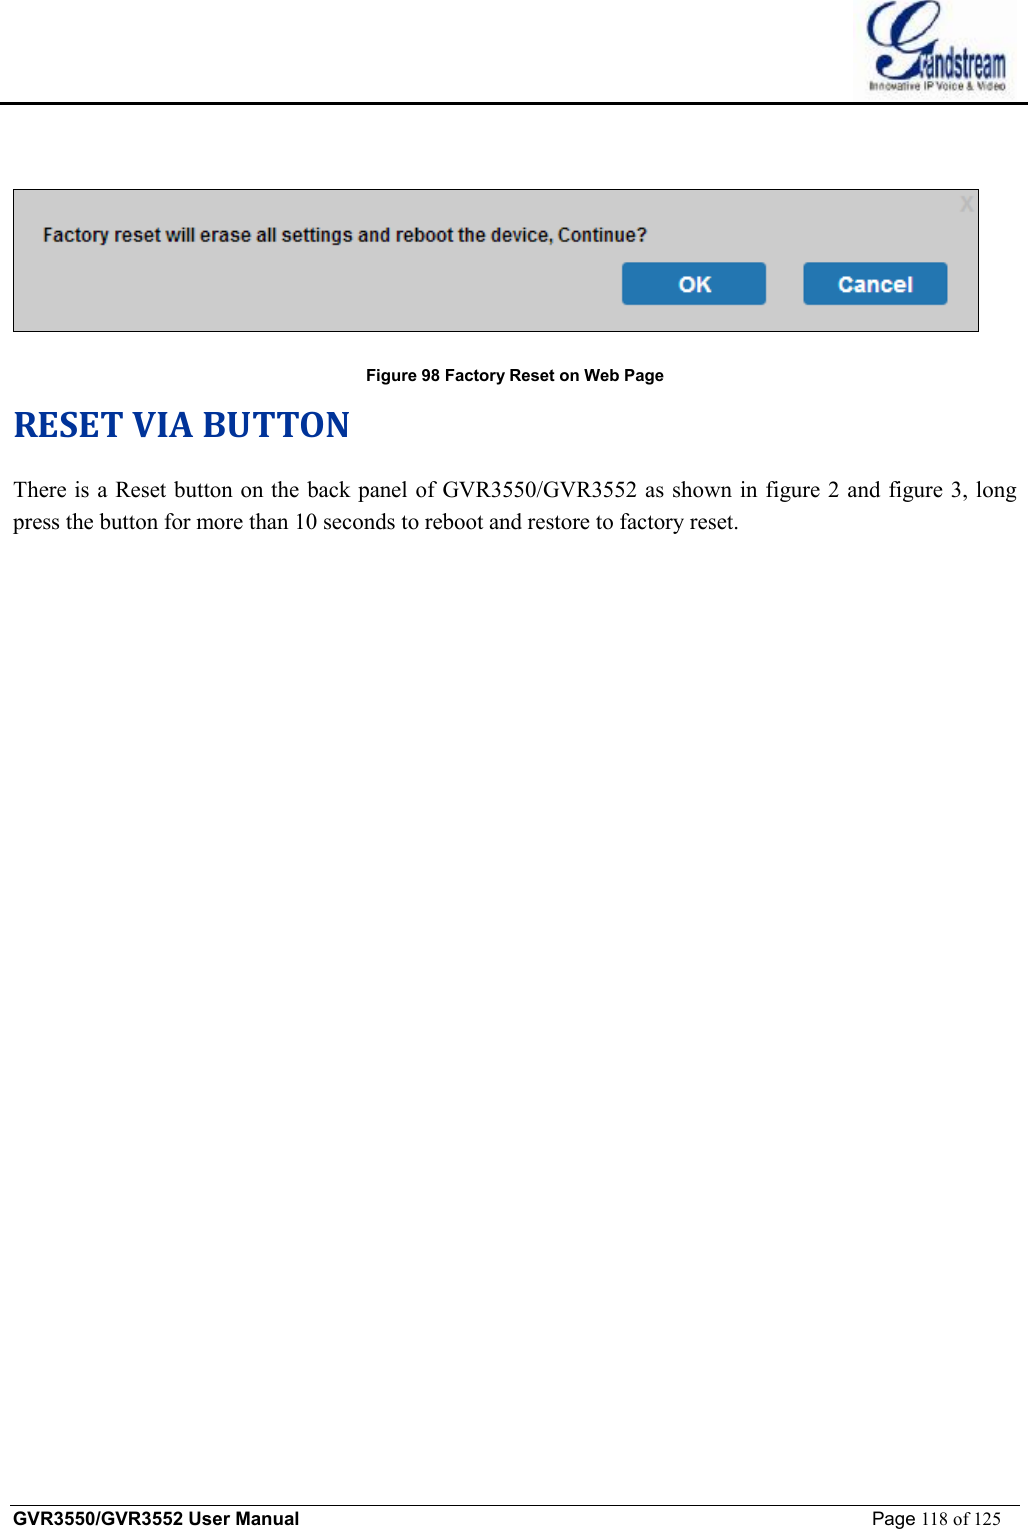    GVR3550/GVR3552 User Manual                                                             Page 118 of 125          Figure 98 Factory Reset on Web Page RESET VIA BUTTON There is a Reset button on the back panel of GVR3550/GVR3552 as shown in figure 2 and figure 3, long press the button for more than 10 seconds to reboot and restore to factory reset. 